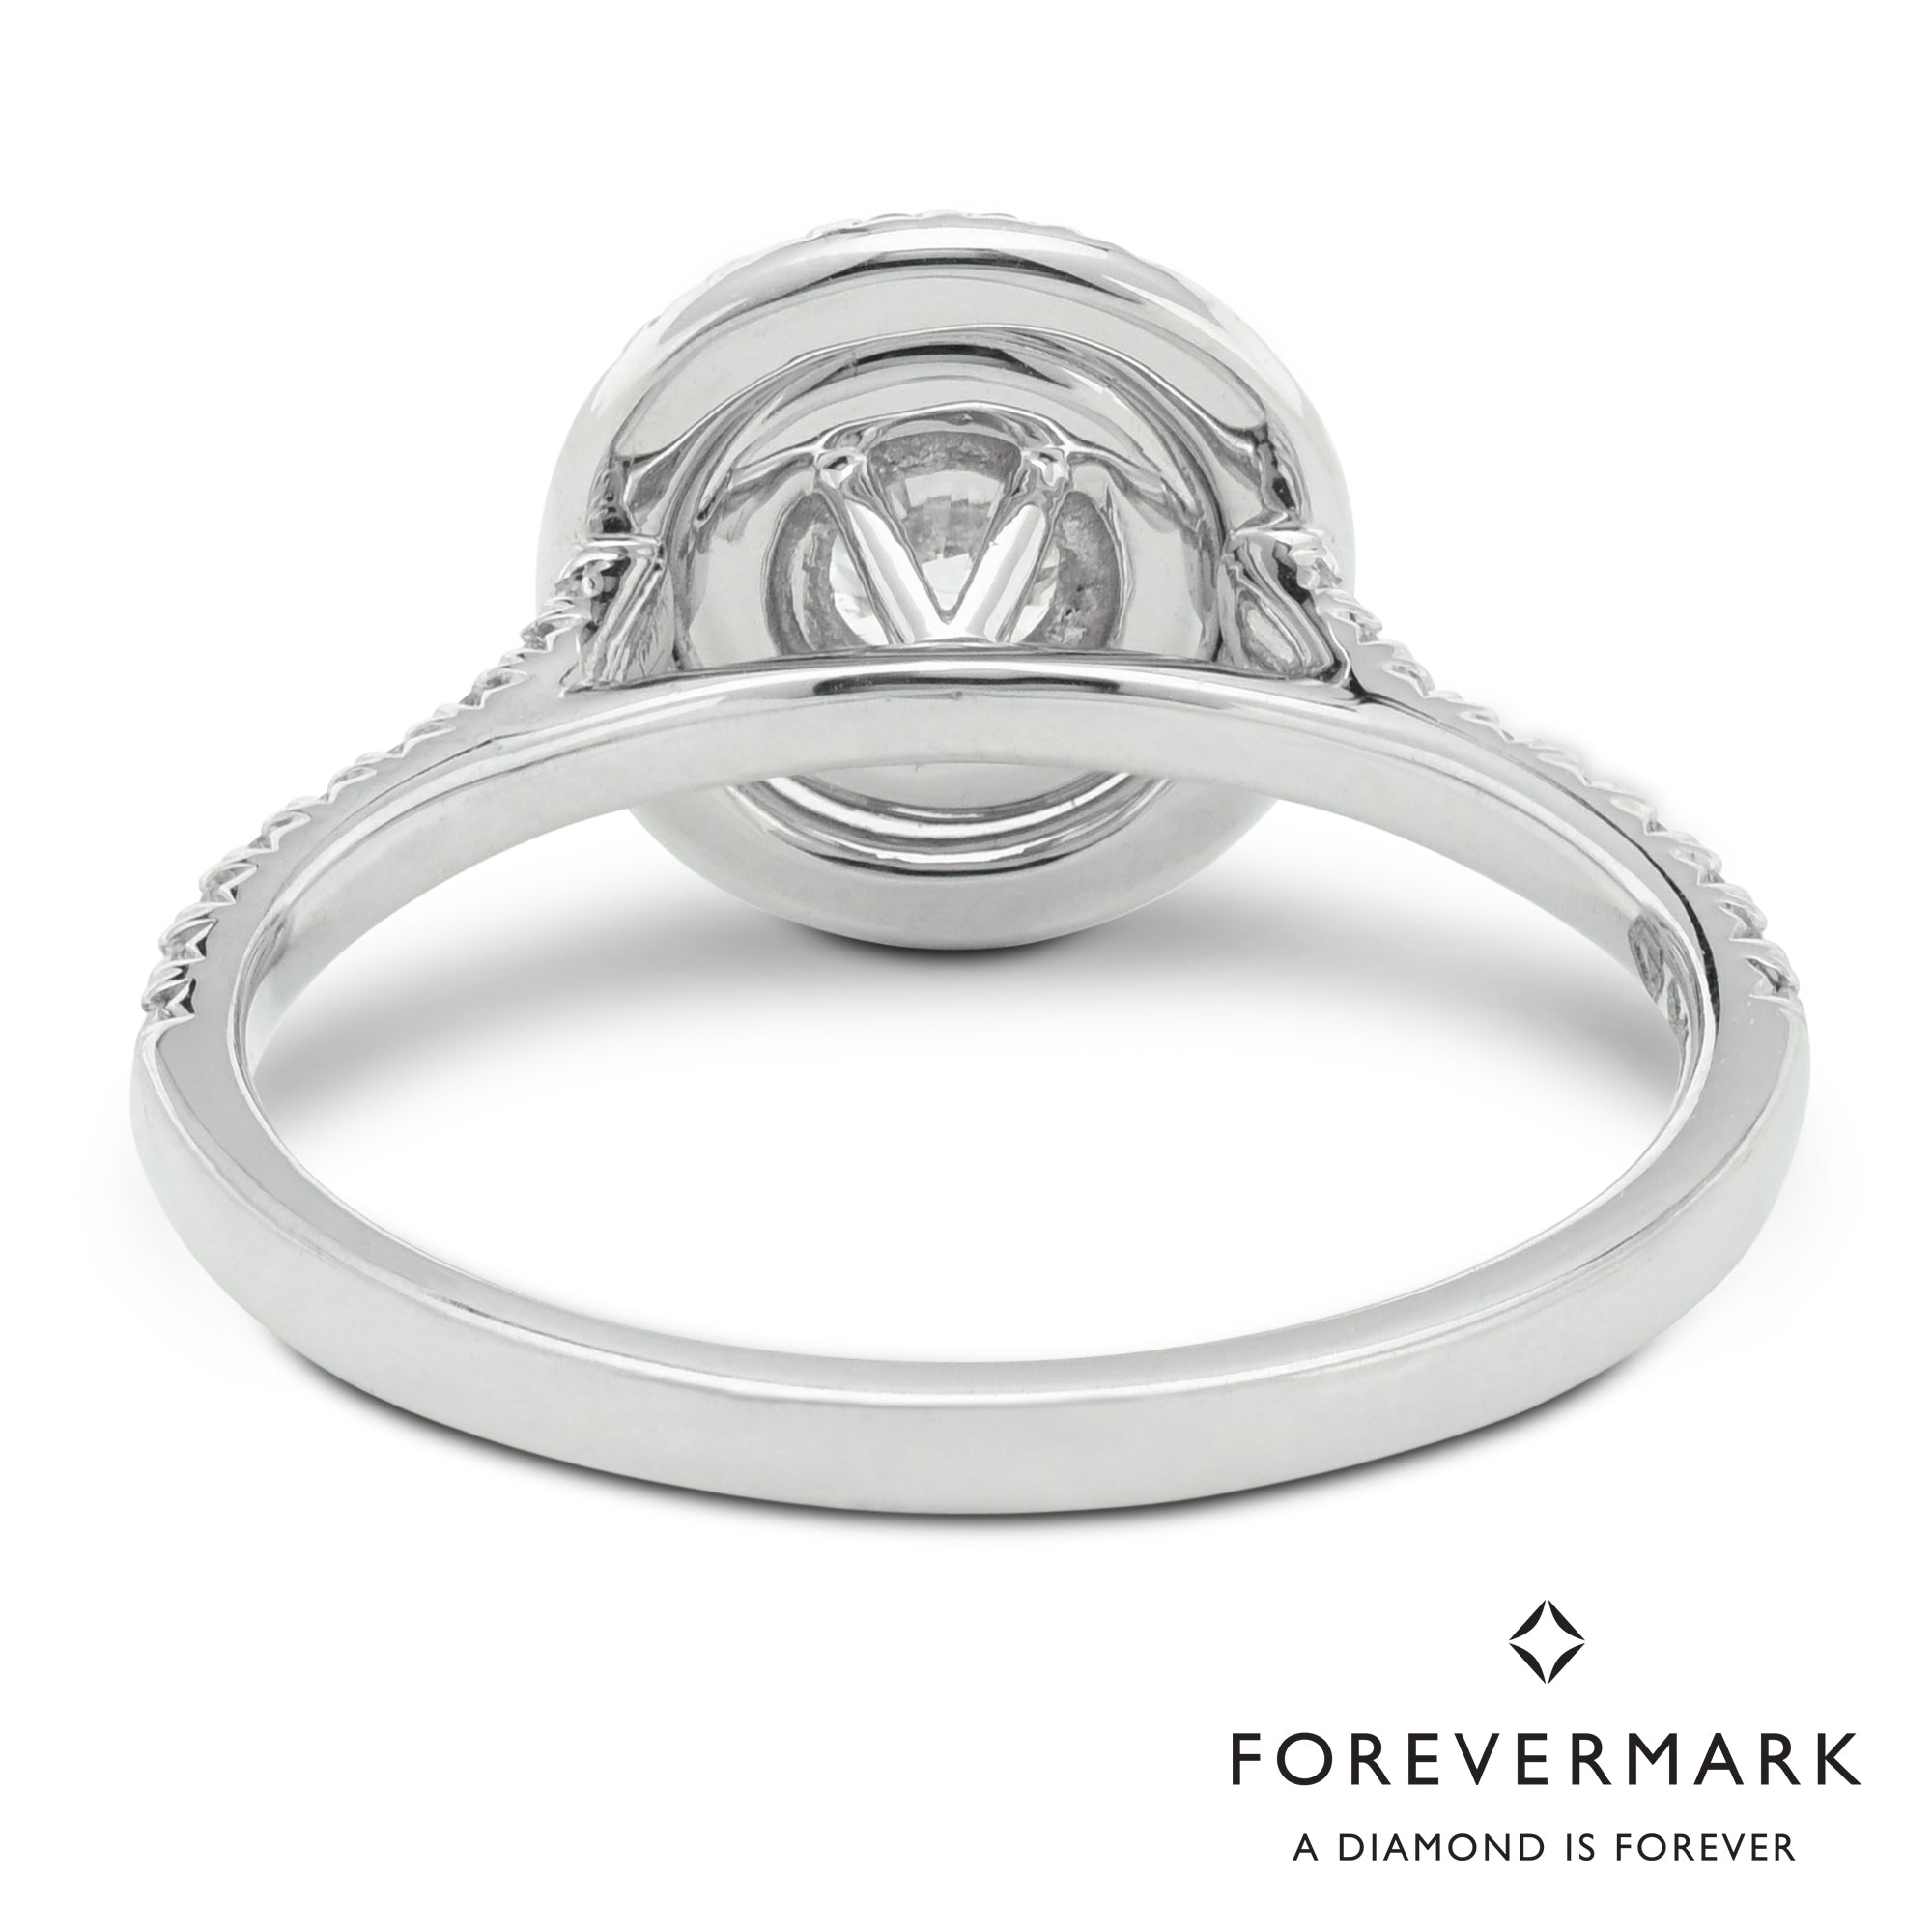 De Beers Forevermark Diamond Center of My Universe Double Halo Diamond Engagement Ring in 18kt White Gold (3/4ct tw)